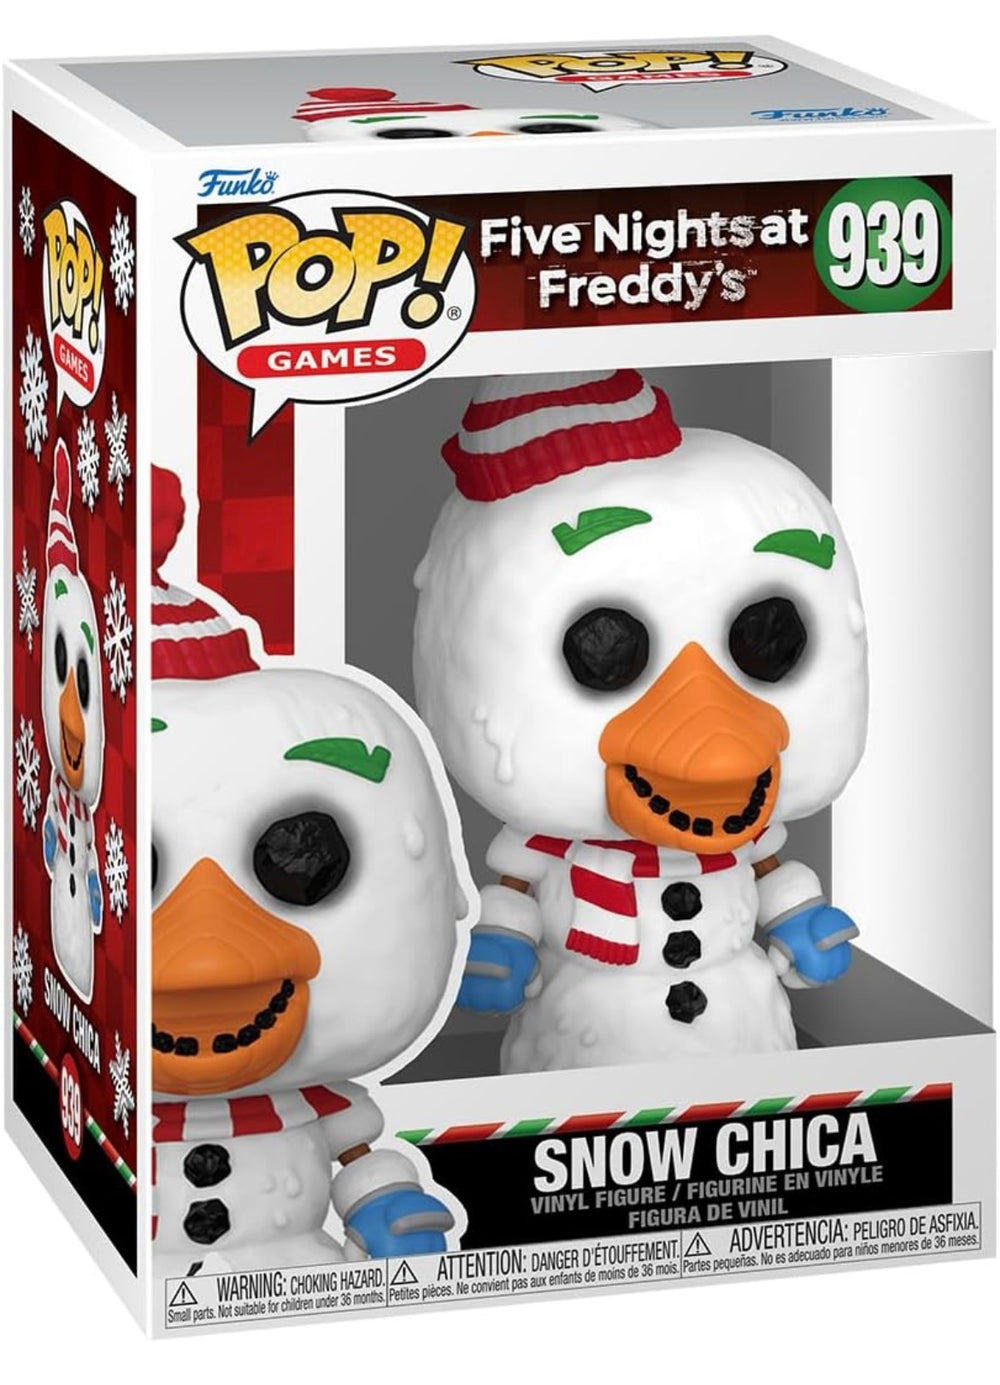 Funko Pop! Games: Five Nights at Freddy's Holiday Snow Chica